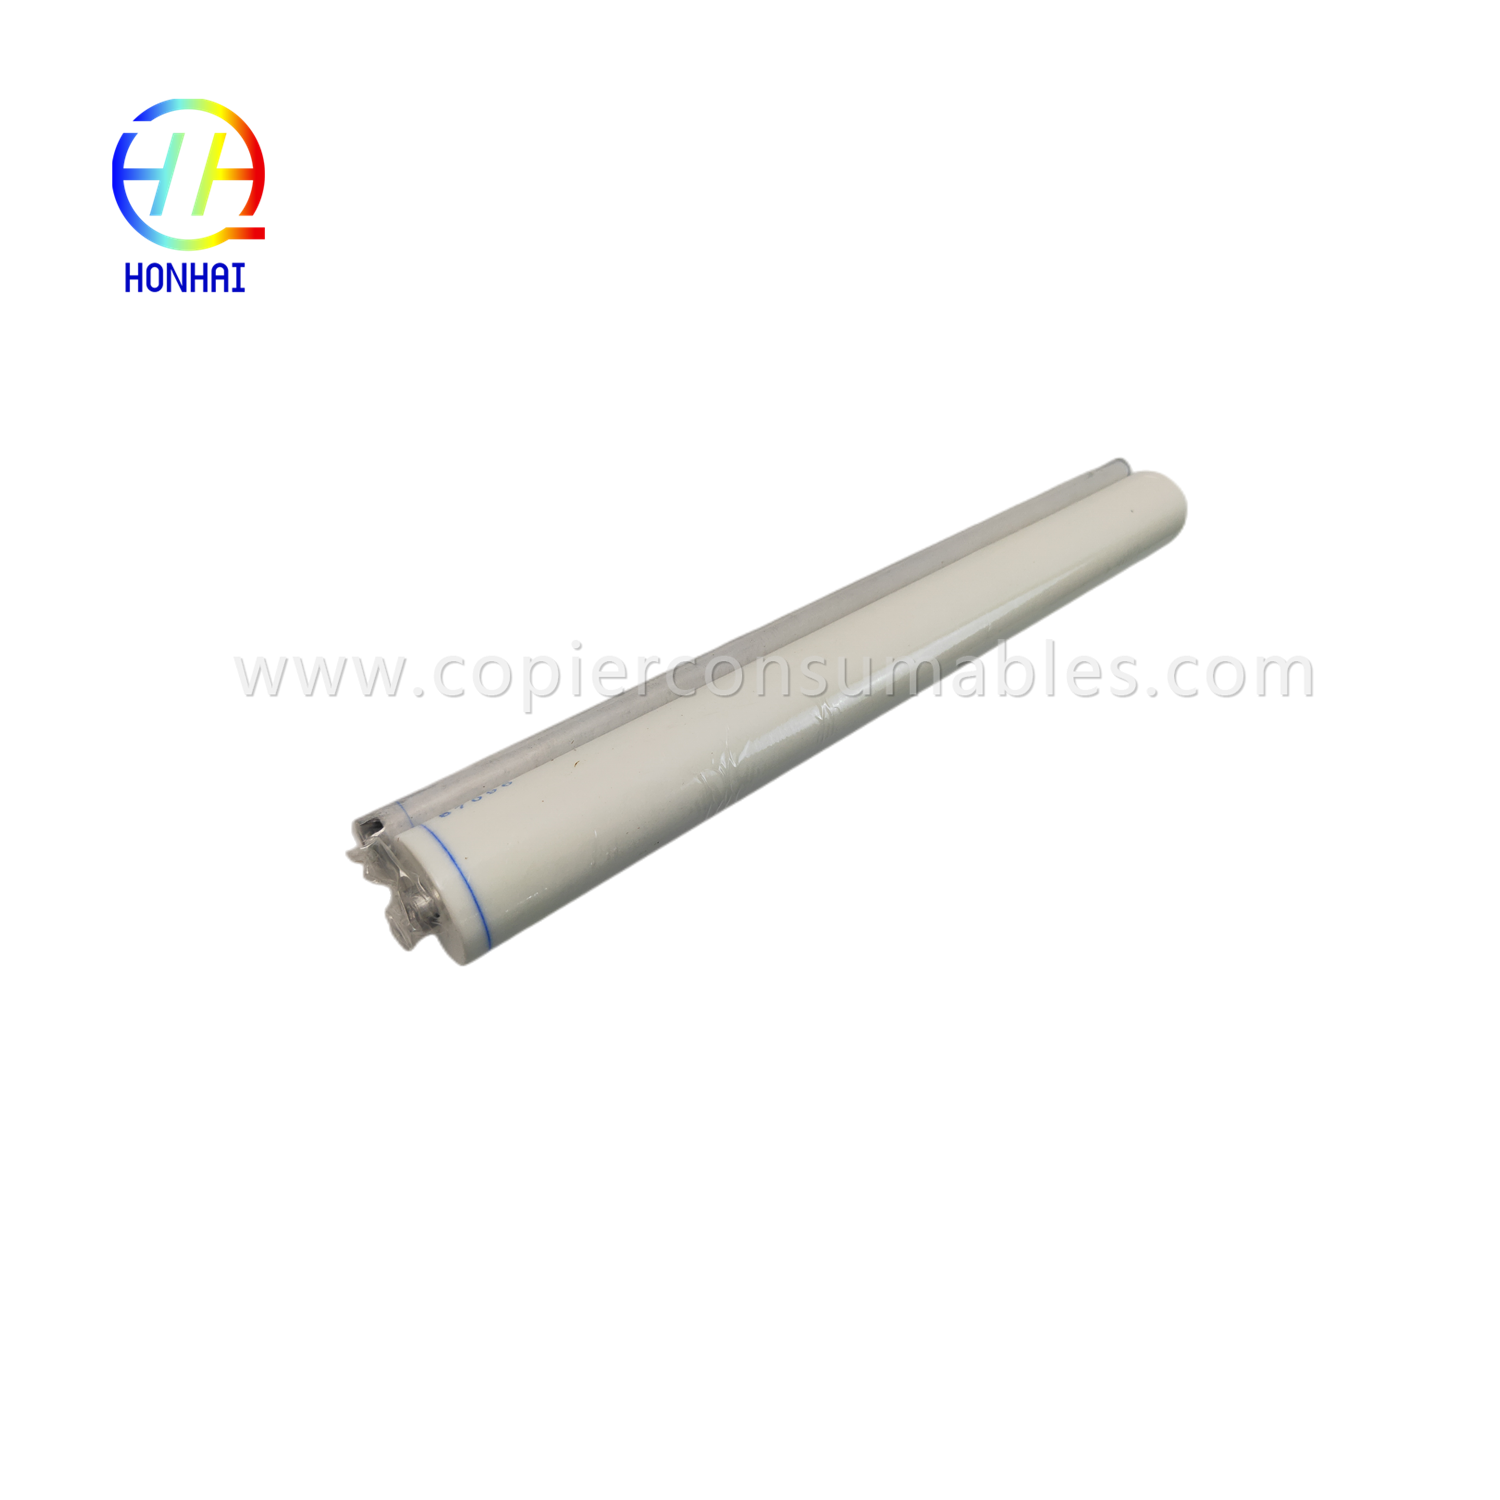 Fuser Cleaning Web for Canon IR6800 iR 8085 8095 8105 8205 8285 8295 FQ-009 FC5-2286-000 OEM Fuser Cleaning Fuser Roller